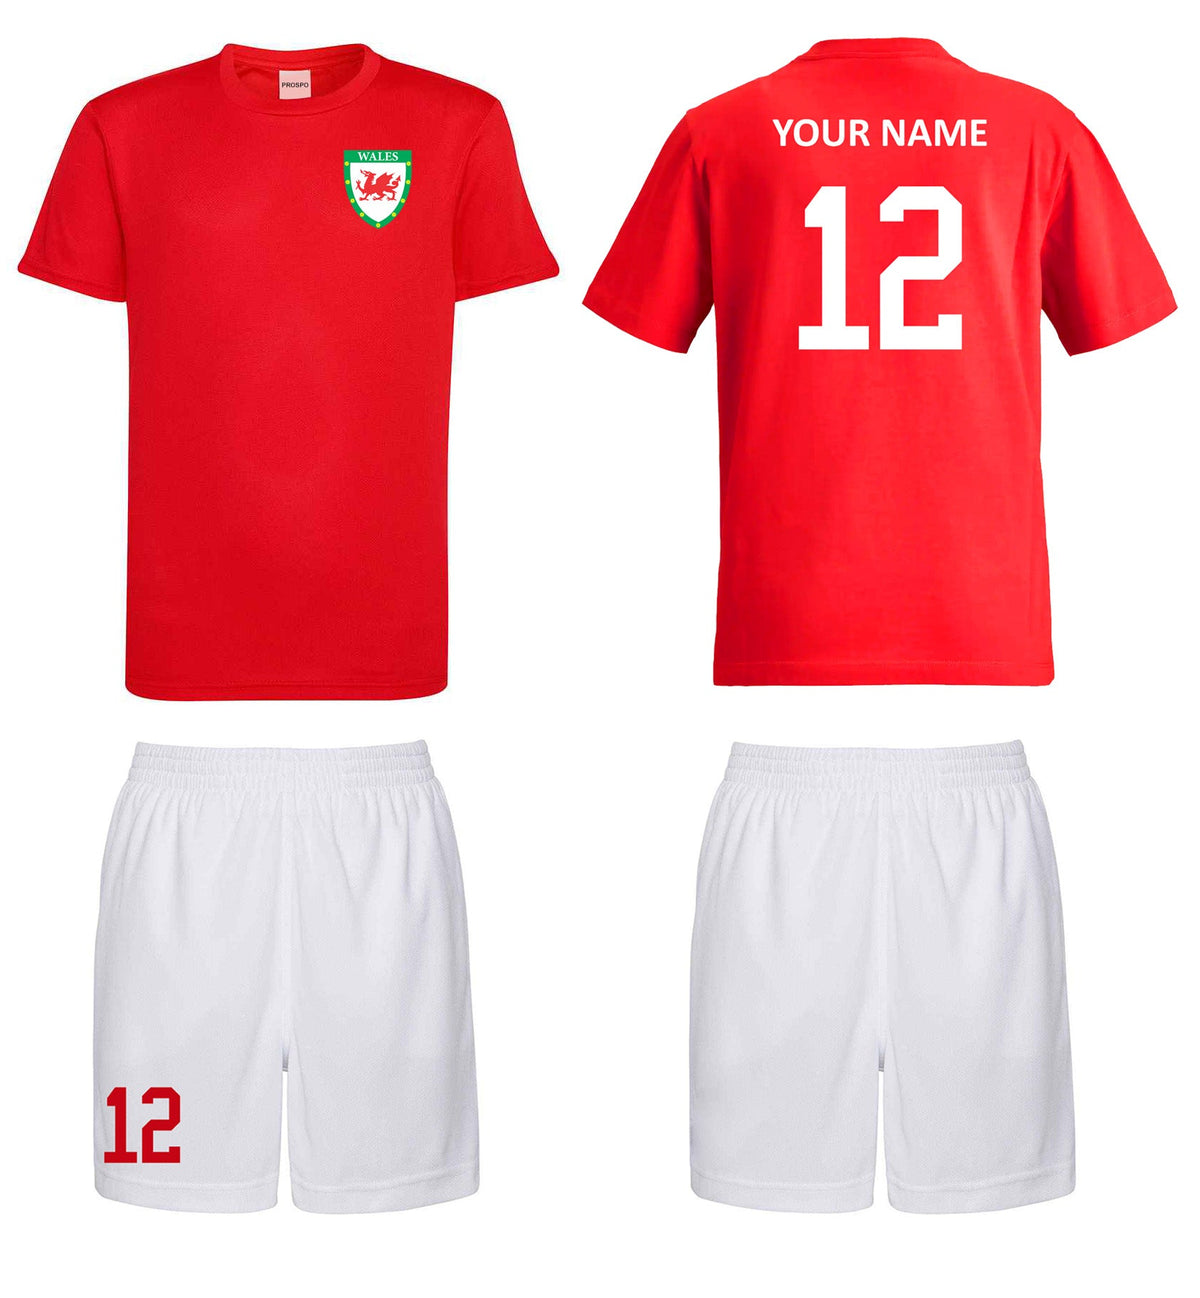 Personalised Wales Style Football Kits Customised Red & White Shirts and Shorts